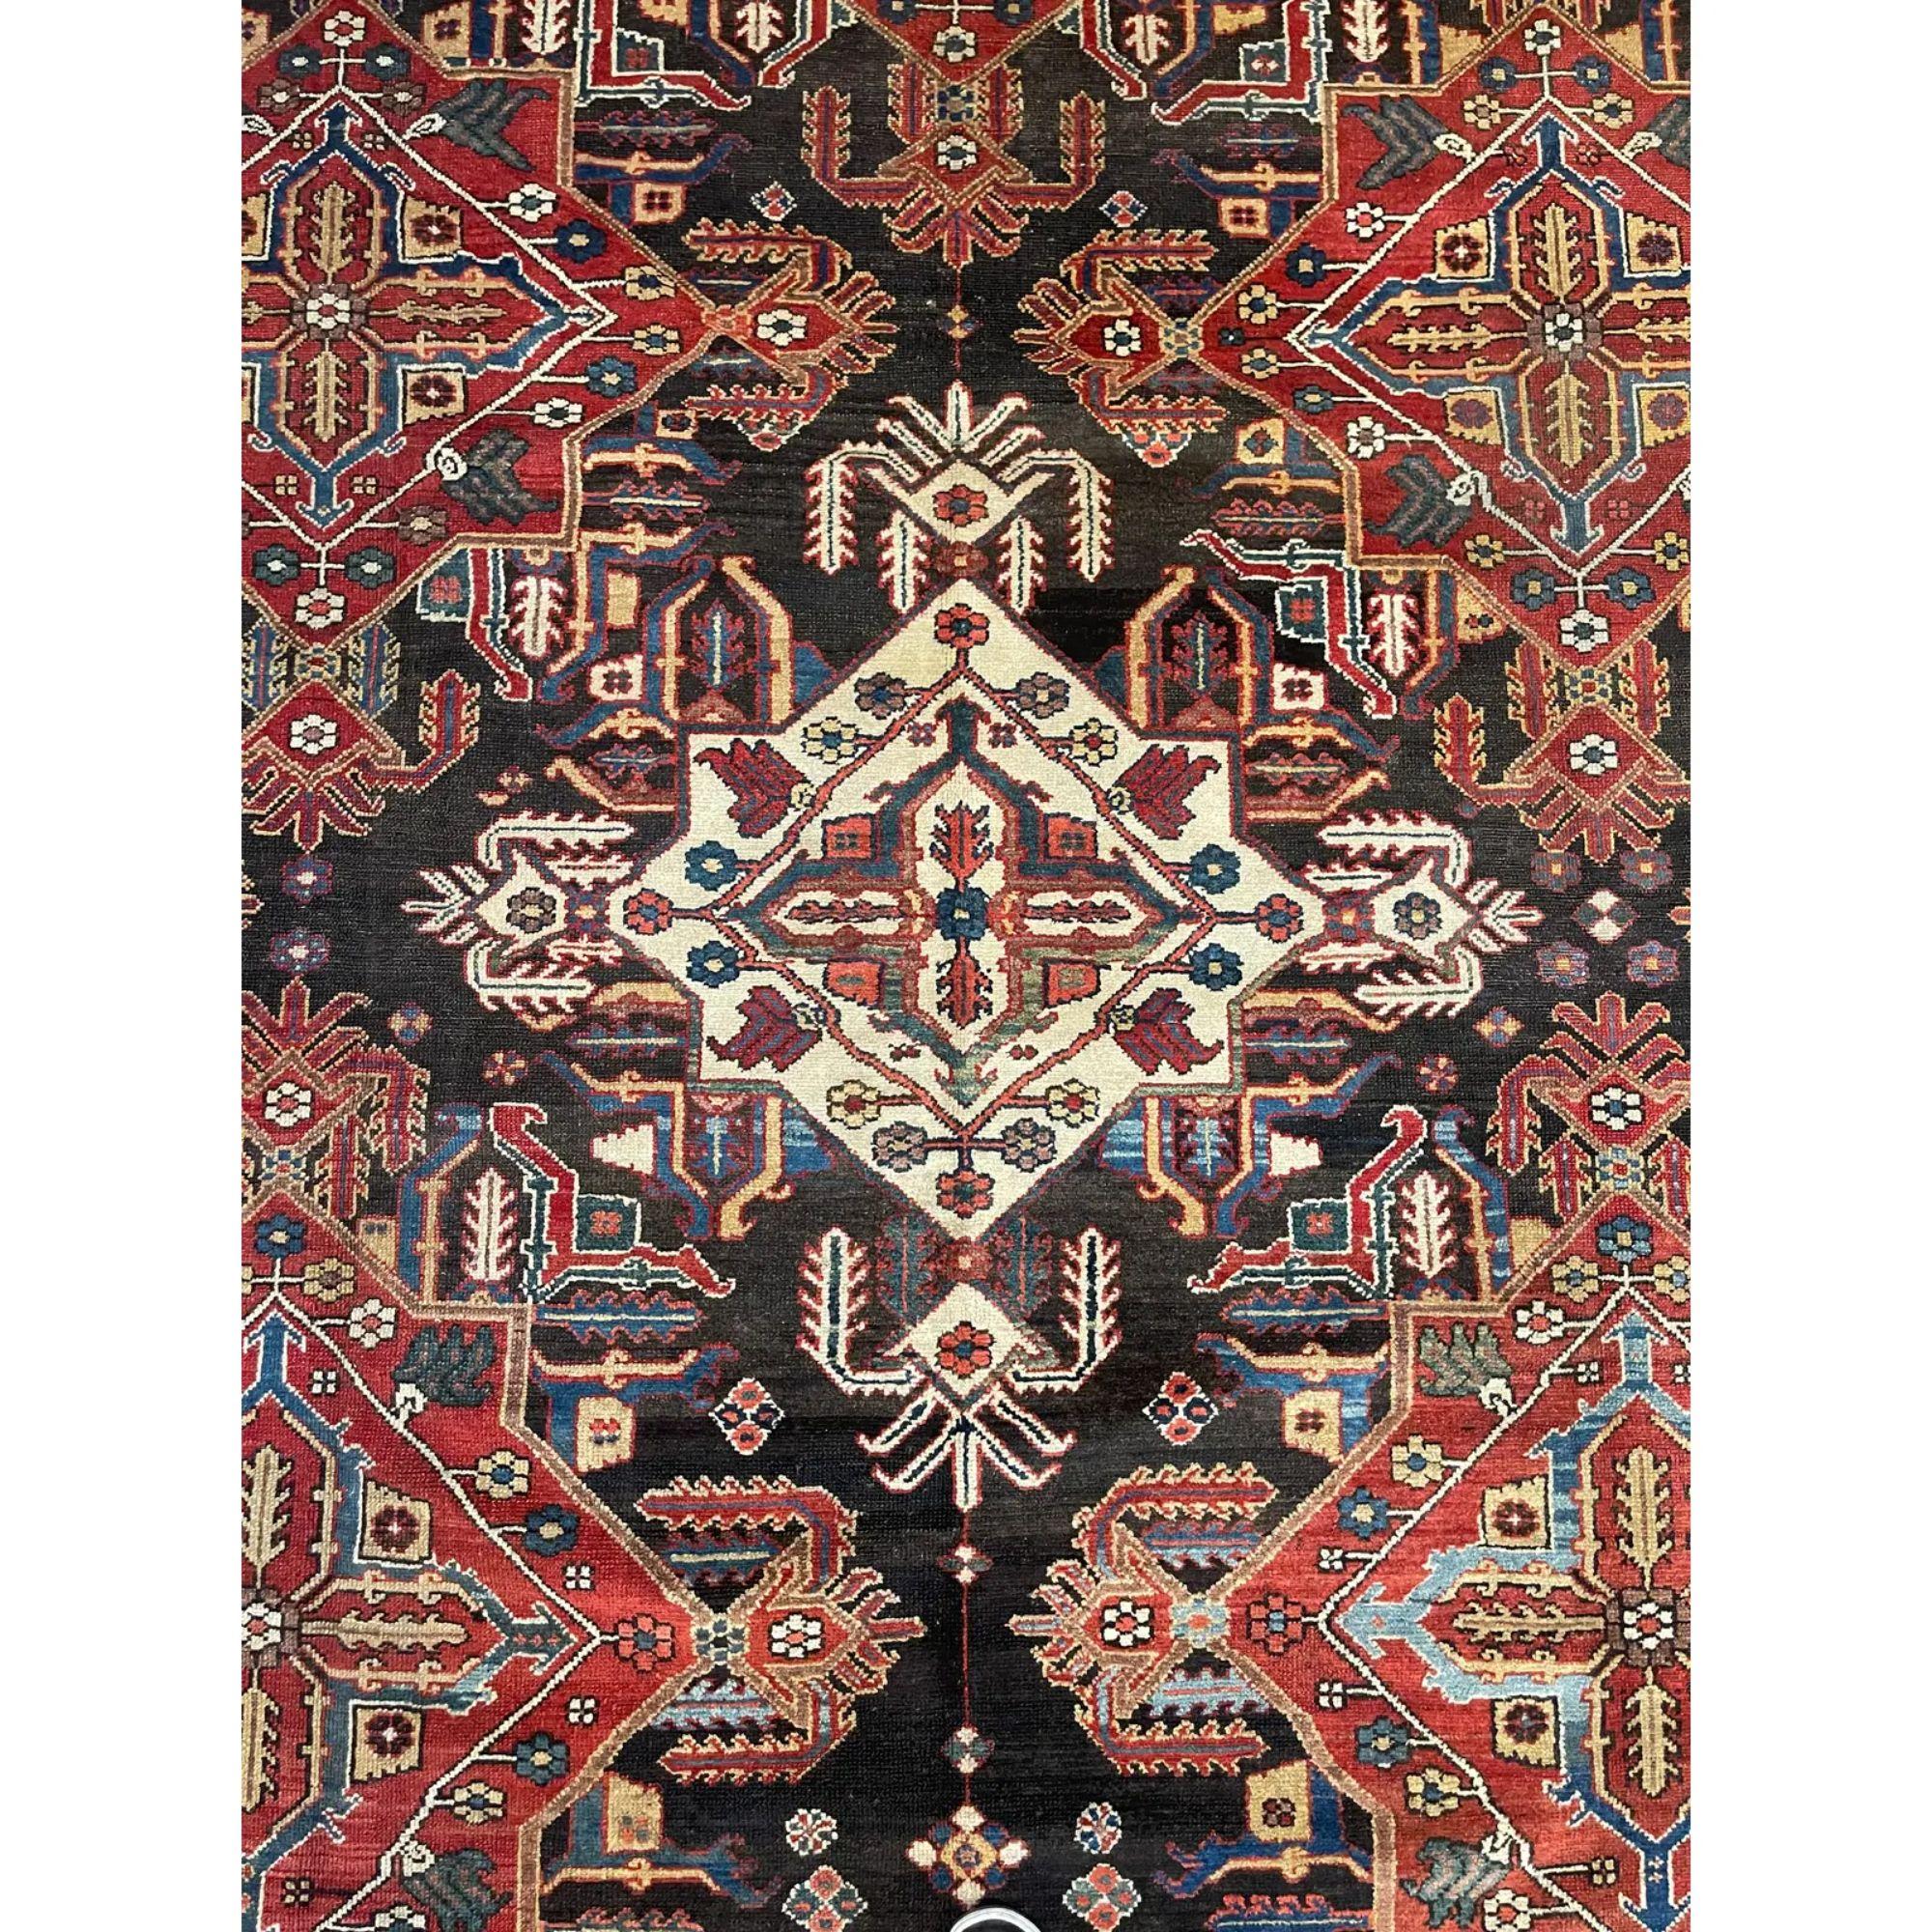 Antique Persian Bakhtiari rugs are among the more intriguing and distinct styles of antique Persian rugs, boasting a fascinating historical heritage and expressing a unique aesthetic ideal. Bakhtiari rugs and carpets are one of the few types and